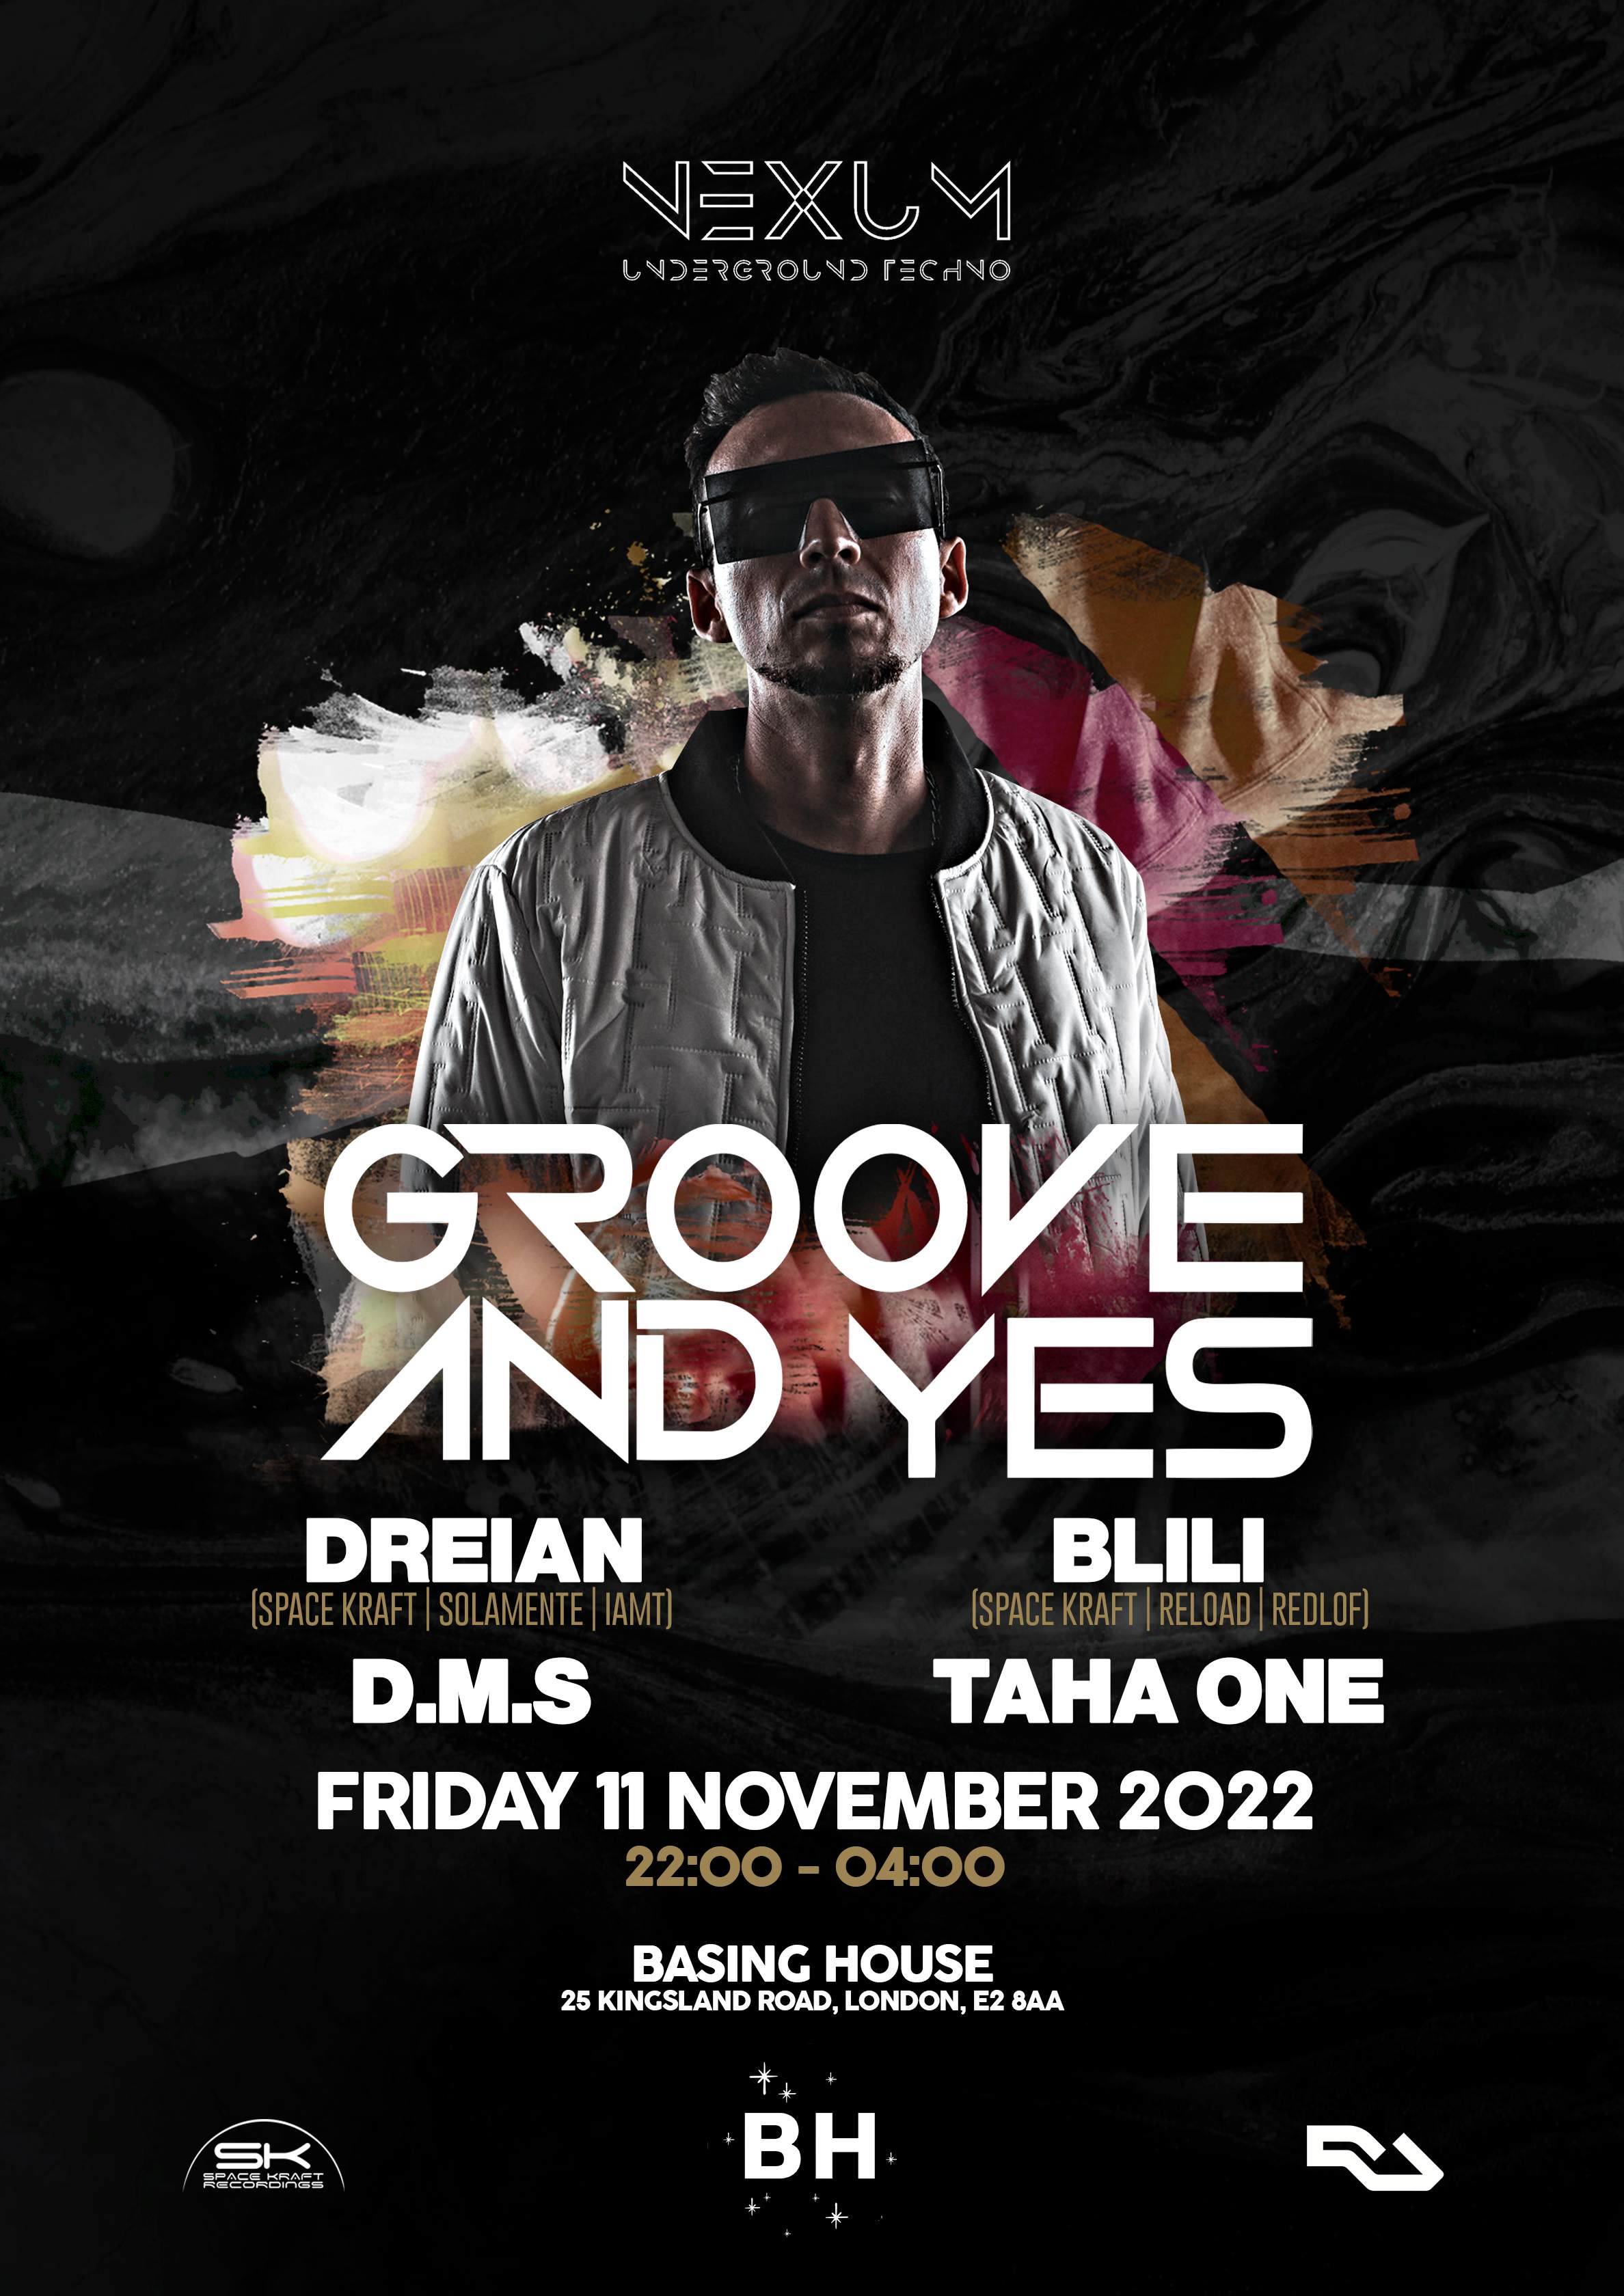 NEXUM presents (FREE ENTRY): GrooveANDyes (UK Debut) w/ DREIAN, BLILI, D.M.S & TAHA ONE  - フライヤー表